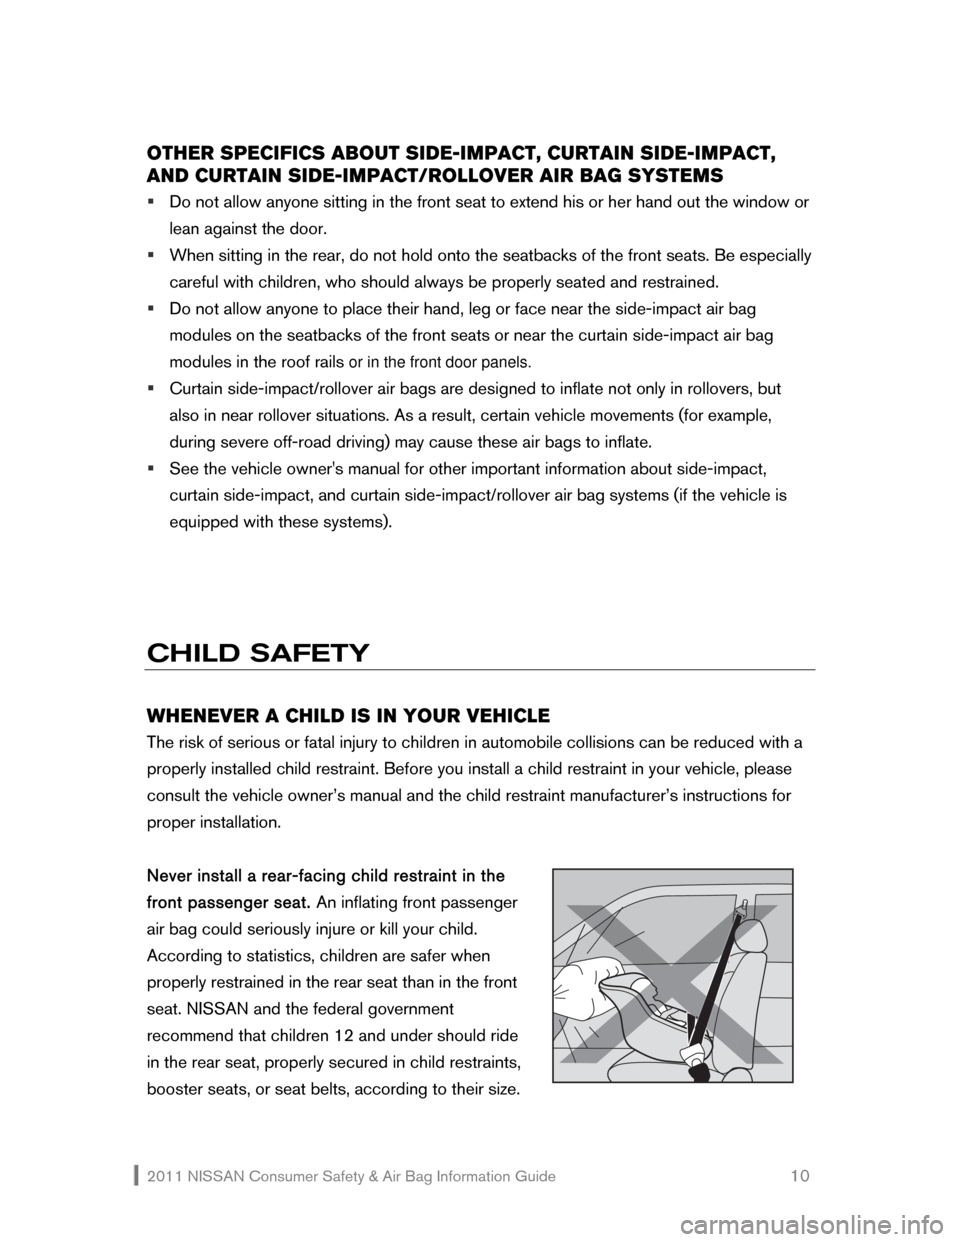 NISSAN ROGUE 2011 1.G Consumer Safety Air Bag Information Guide 2011 NISSAN Consumer Safety & Air Bag Information Guide                                                       10 
OTHER SPECIFICS ABOUT SIDE-IMPACT, CURTAIN SIDE-IMPACT, 
AND CURTAIN SIDE-IMPACT/ROLLO